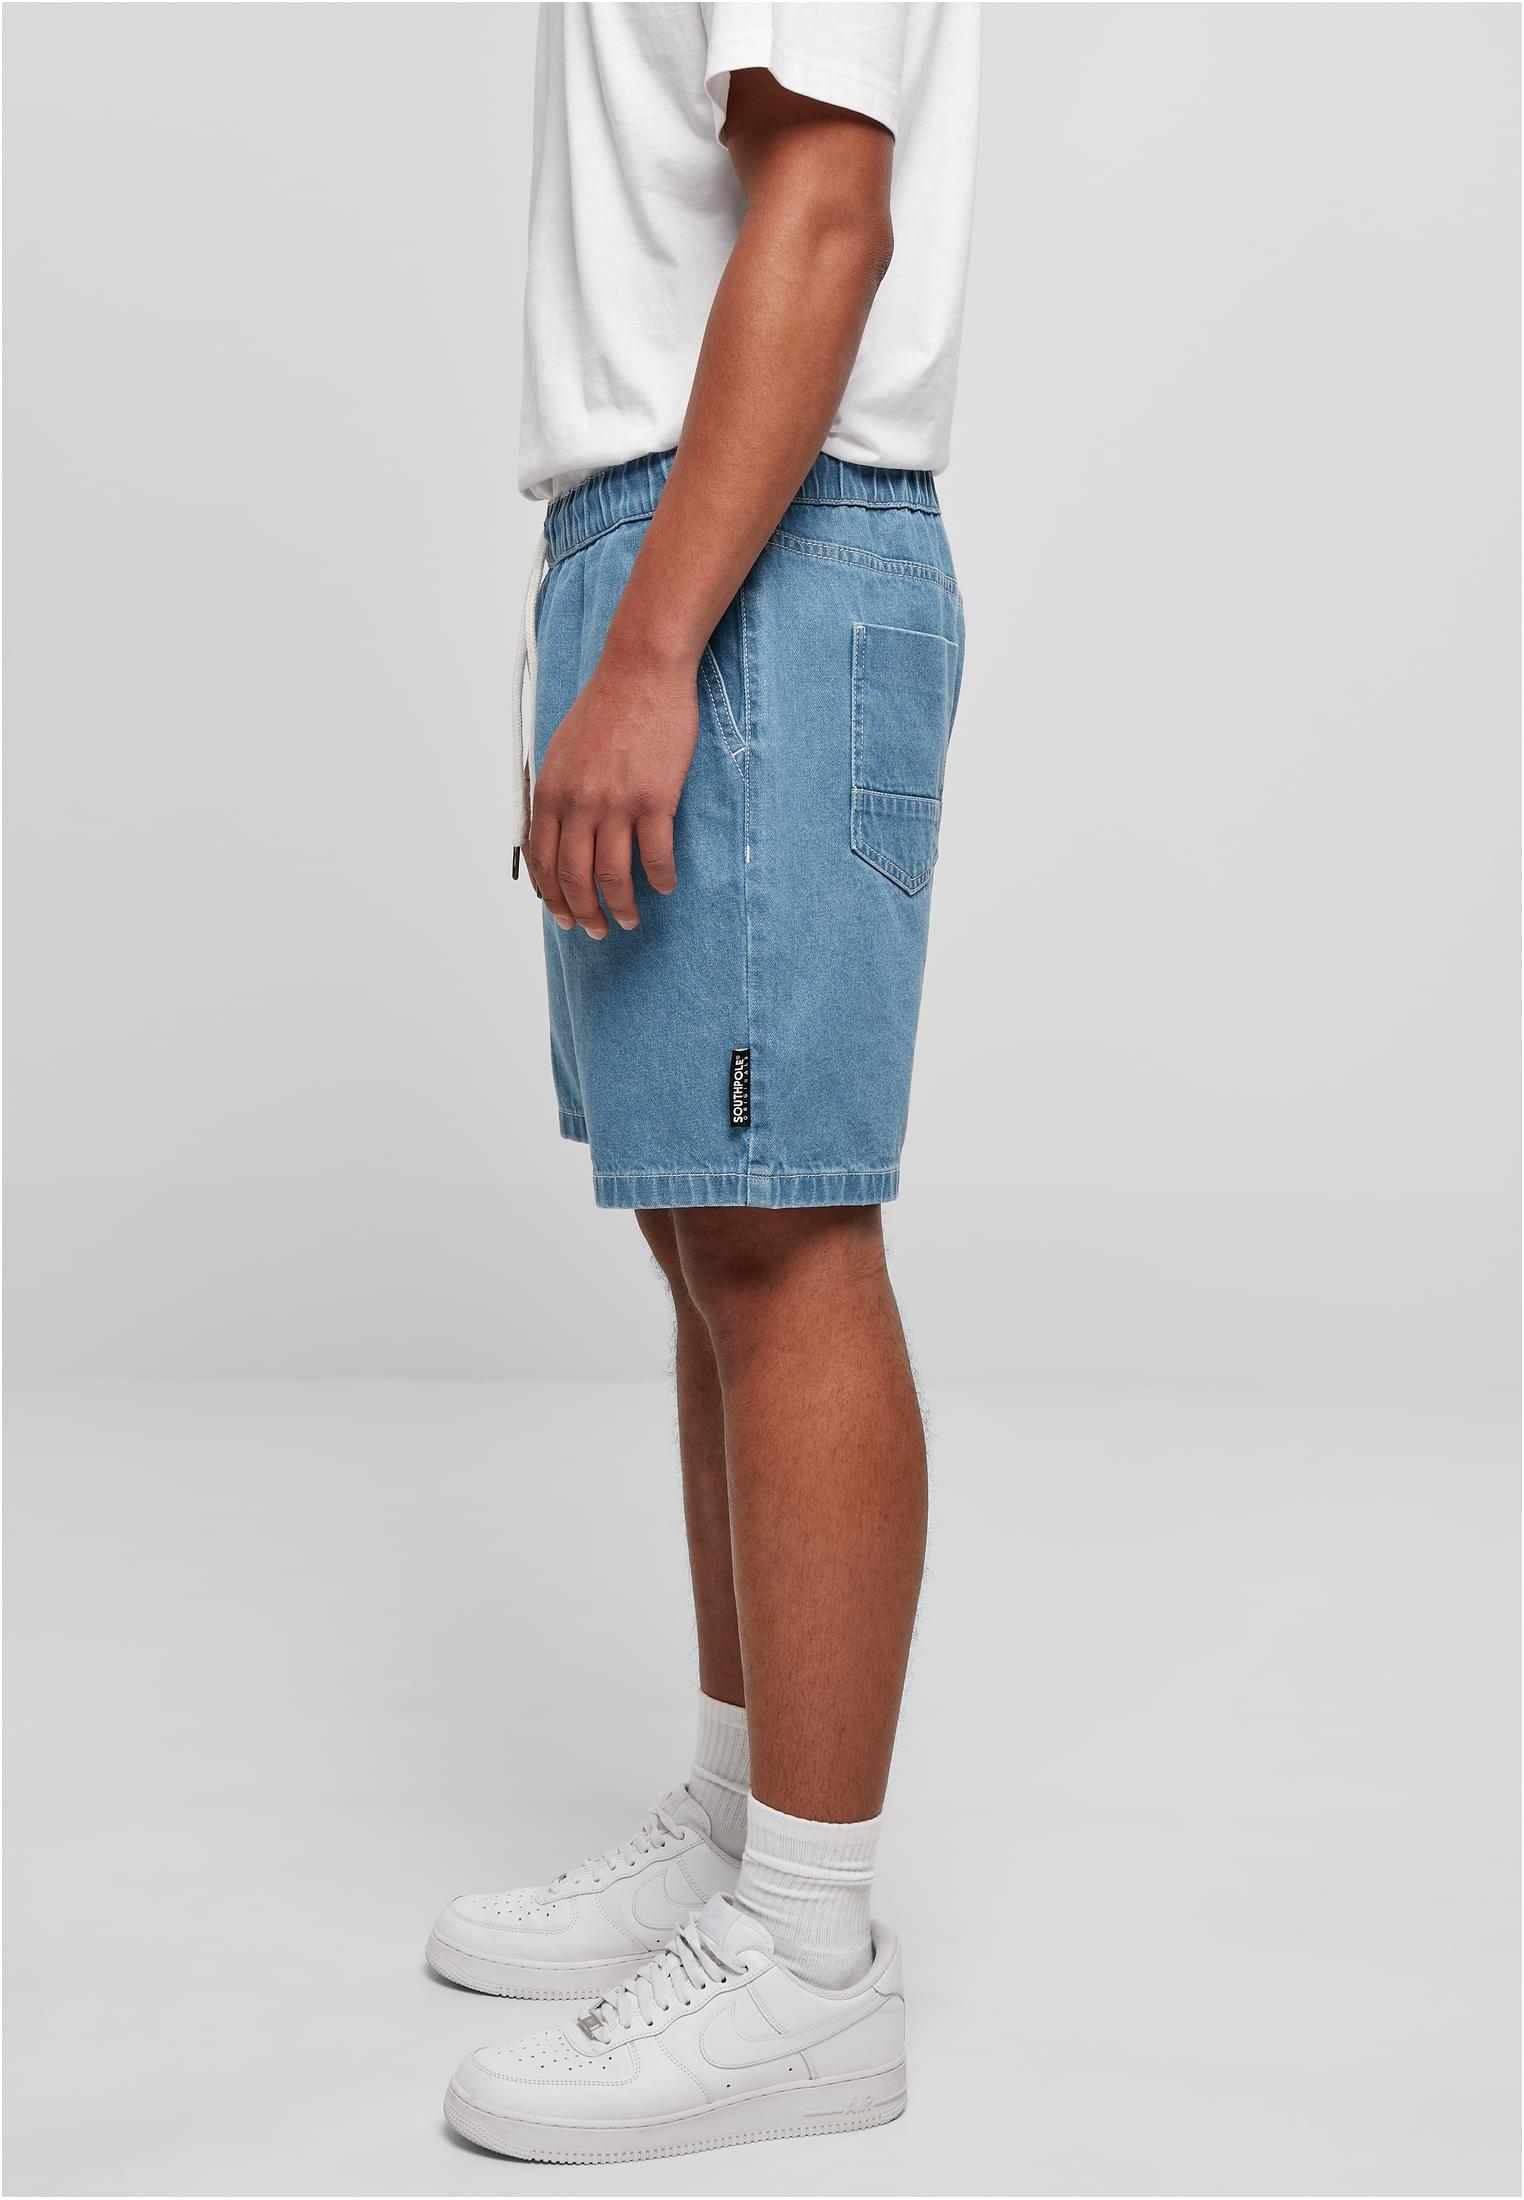 Saisonware Southpole Denim Shorts in Farbe midblue washed